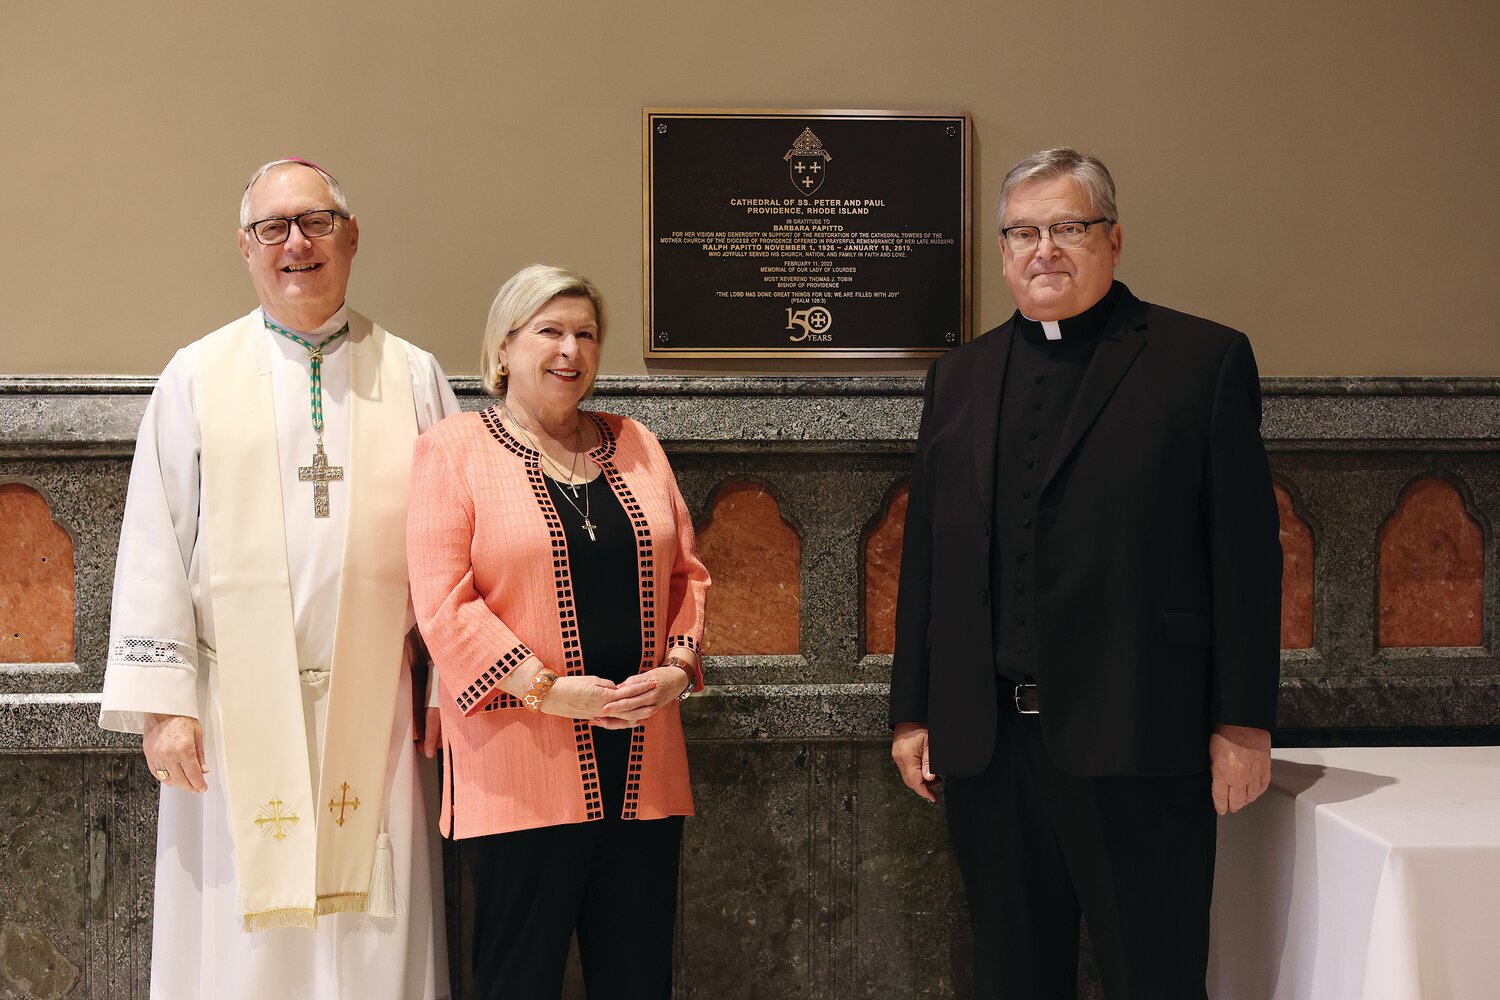 A plaque was installed and blessed in the Cathedral of SS. Peter and Paul, honoring years of dedicated support for the local church by Barbara Papitto and her late husband Ralph, a successful local businessman. Their support includes a $4.5 million donation to the cathedral enabling the recent restoration of its towers to be completed. Pictured, Bishop Thomas J. Tobin, Barbara Papitto and Msgr. Anthony Mancini, rector of the Cathedral of SS. Peter and Paul.